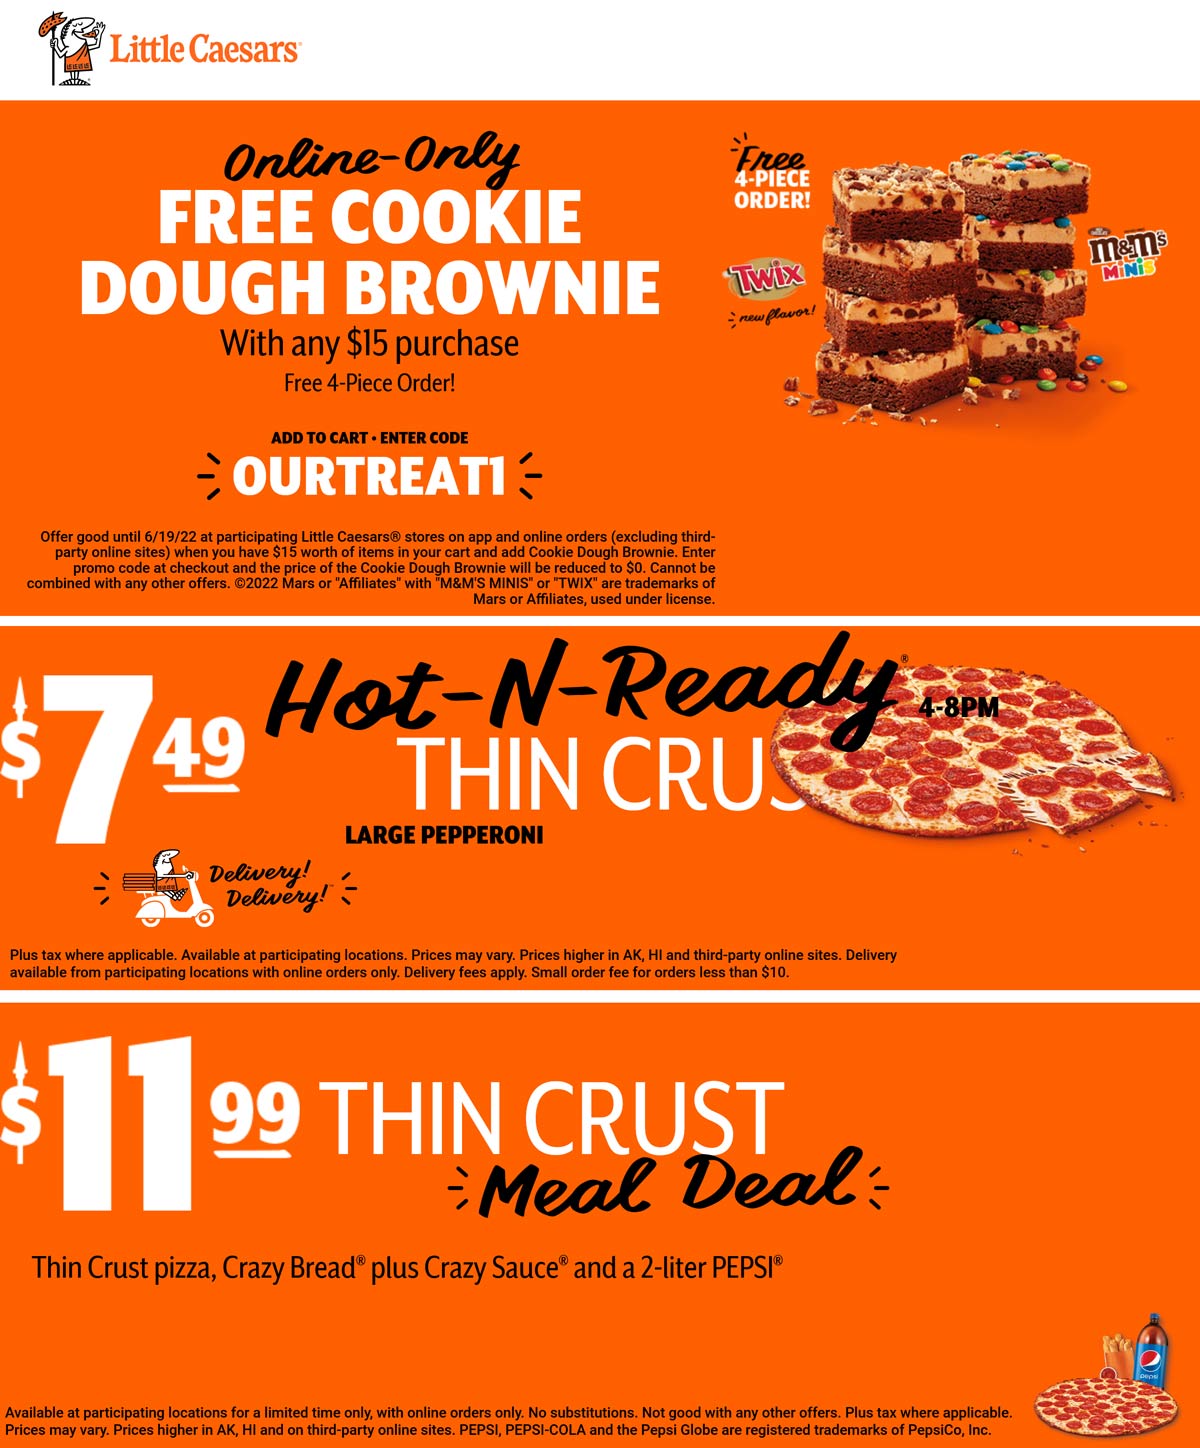 Little Caesars restaurants Coupon  Free 4pc cookie dough brownies on $15 at Little Caesars pizza via promo code OURTREAT #littlecaesars 